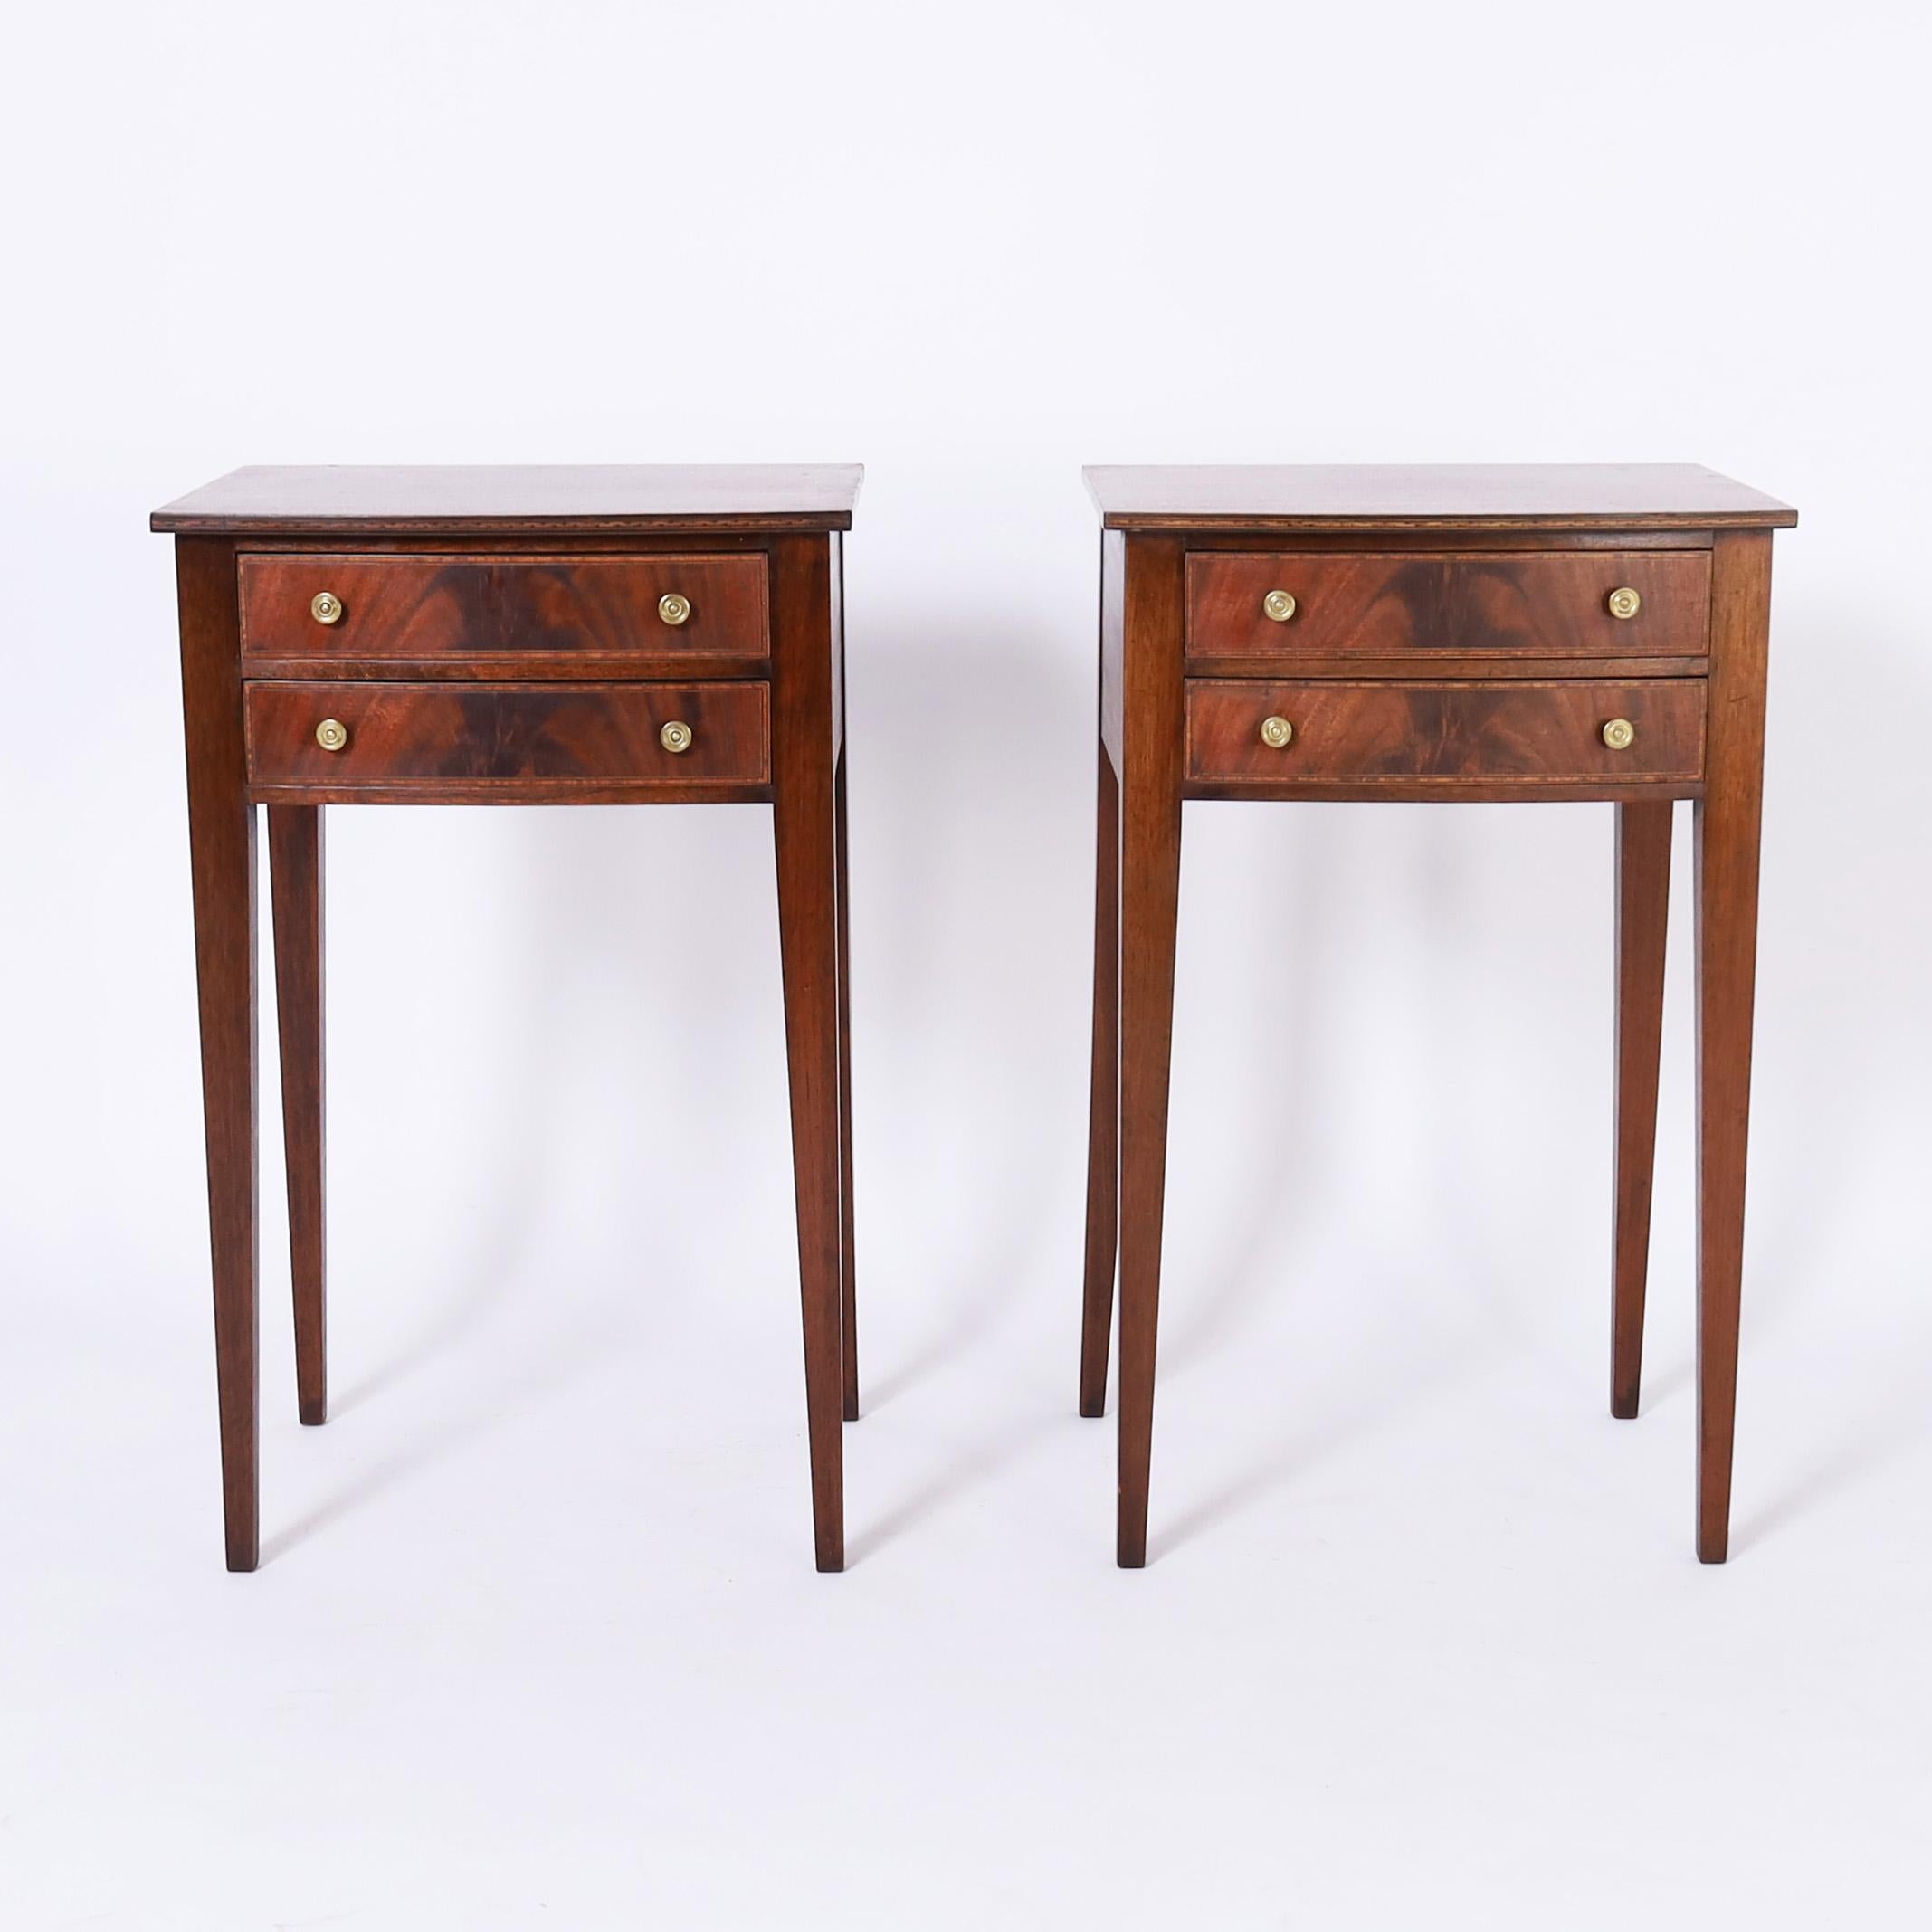 Standout pair of early 19th century English stands handcrafted in mahogany with bow front tops having geometric inlaid edges over two drawer cases with flame mahogany fronts and cross banded inlays on elegant tapered legs.